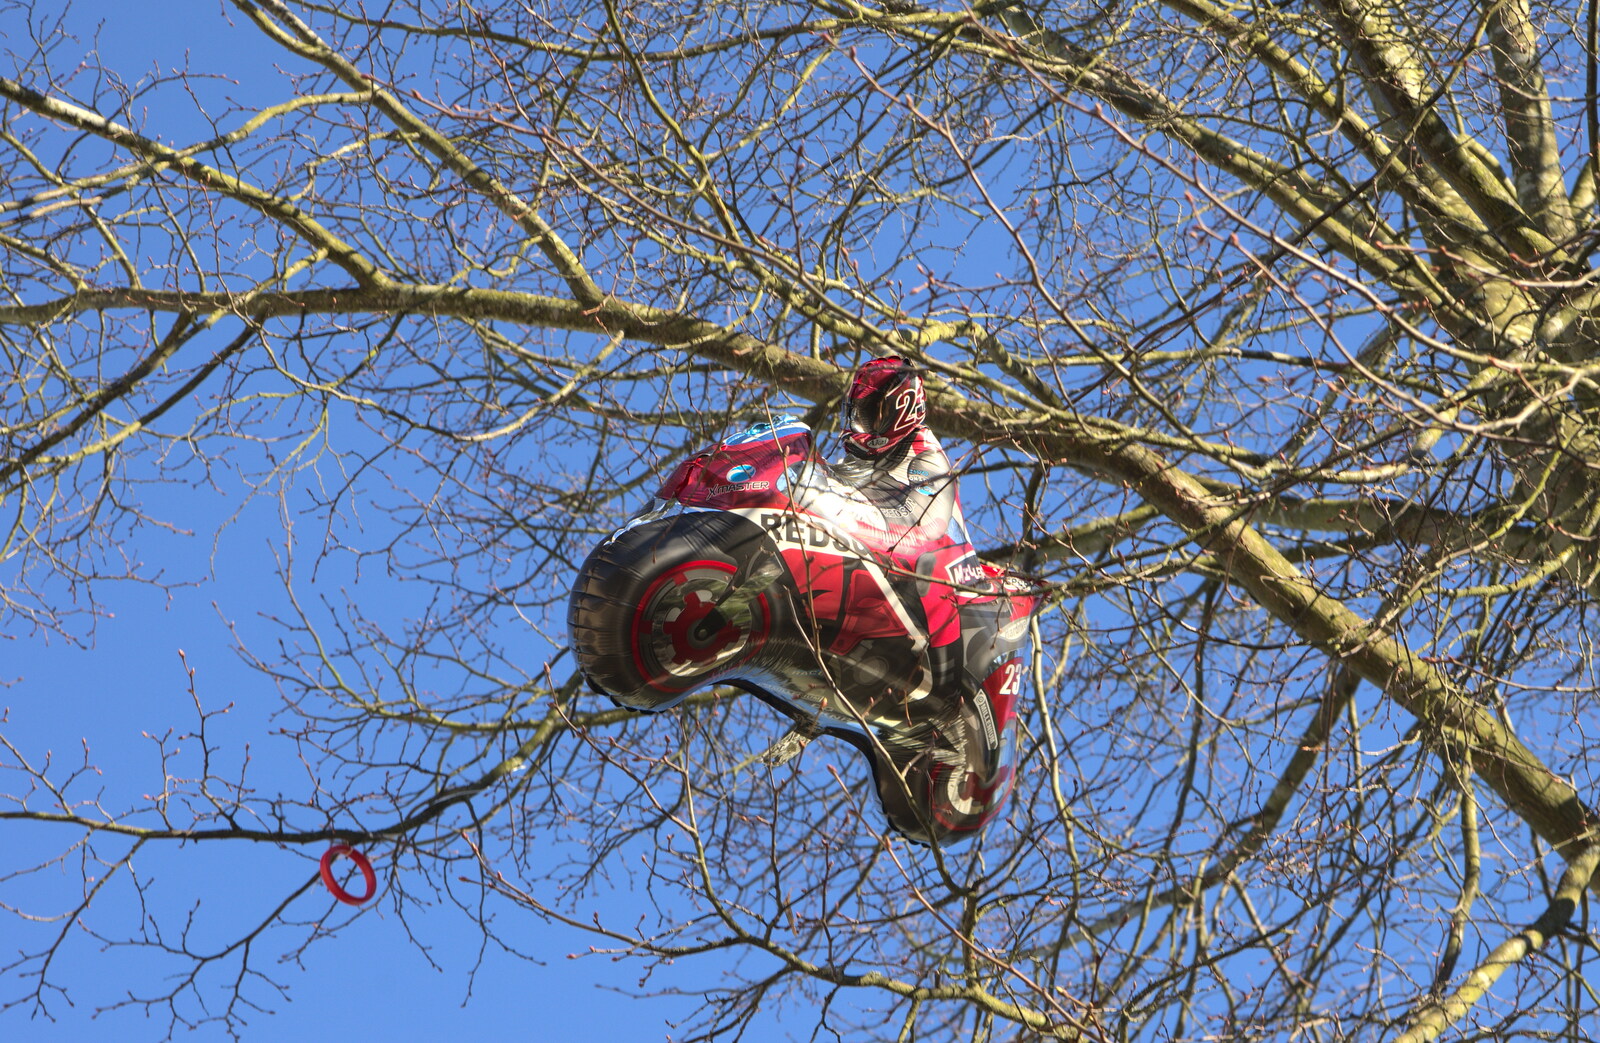 A balloon has been up a tree for most of the day from A Trip to Legoland, Windsor, Berkshire - 25th March 2017